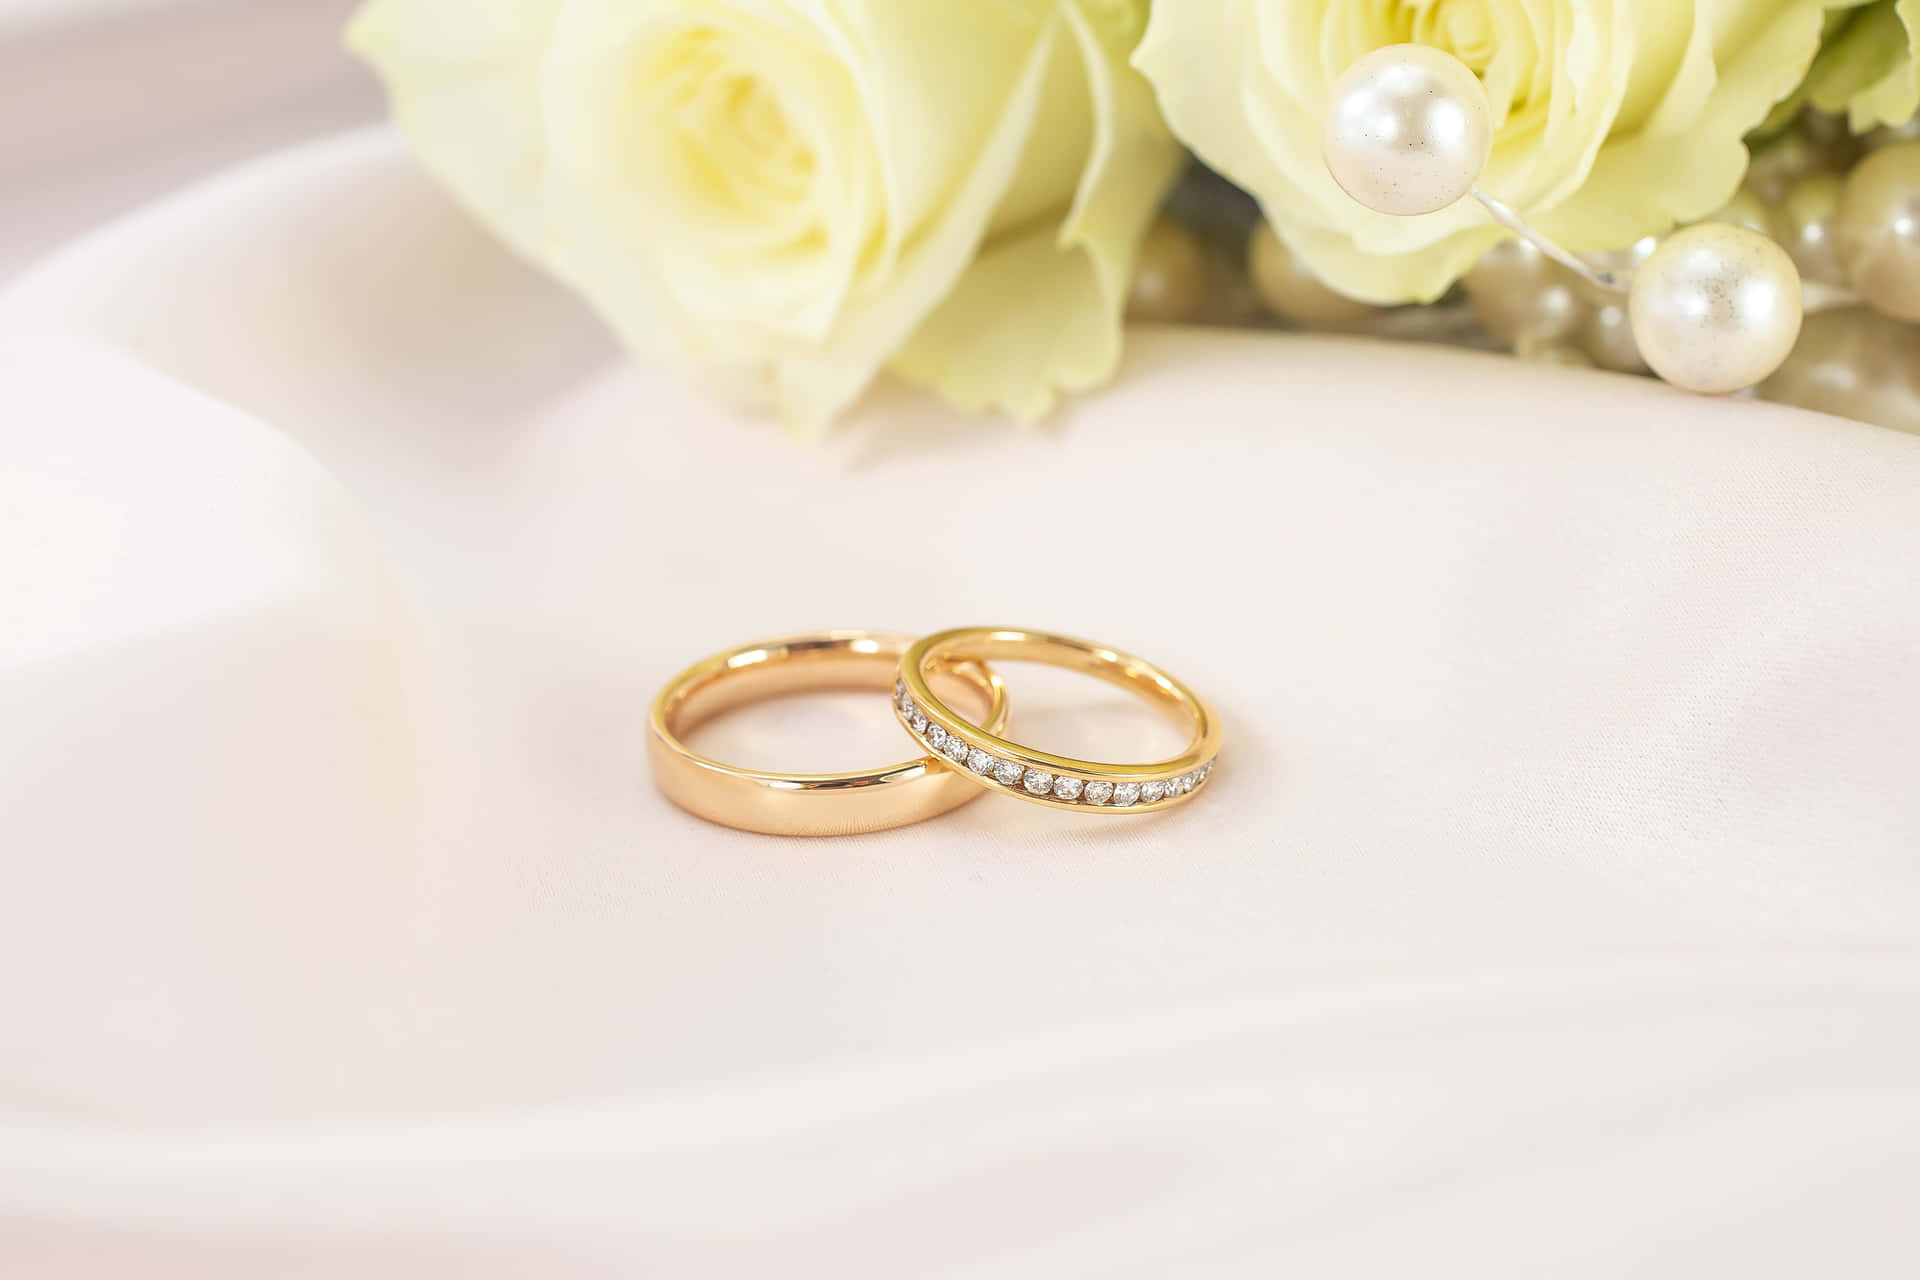 Two gold wedding rings, shining brightly in the sun.